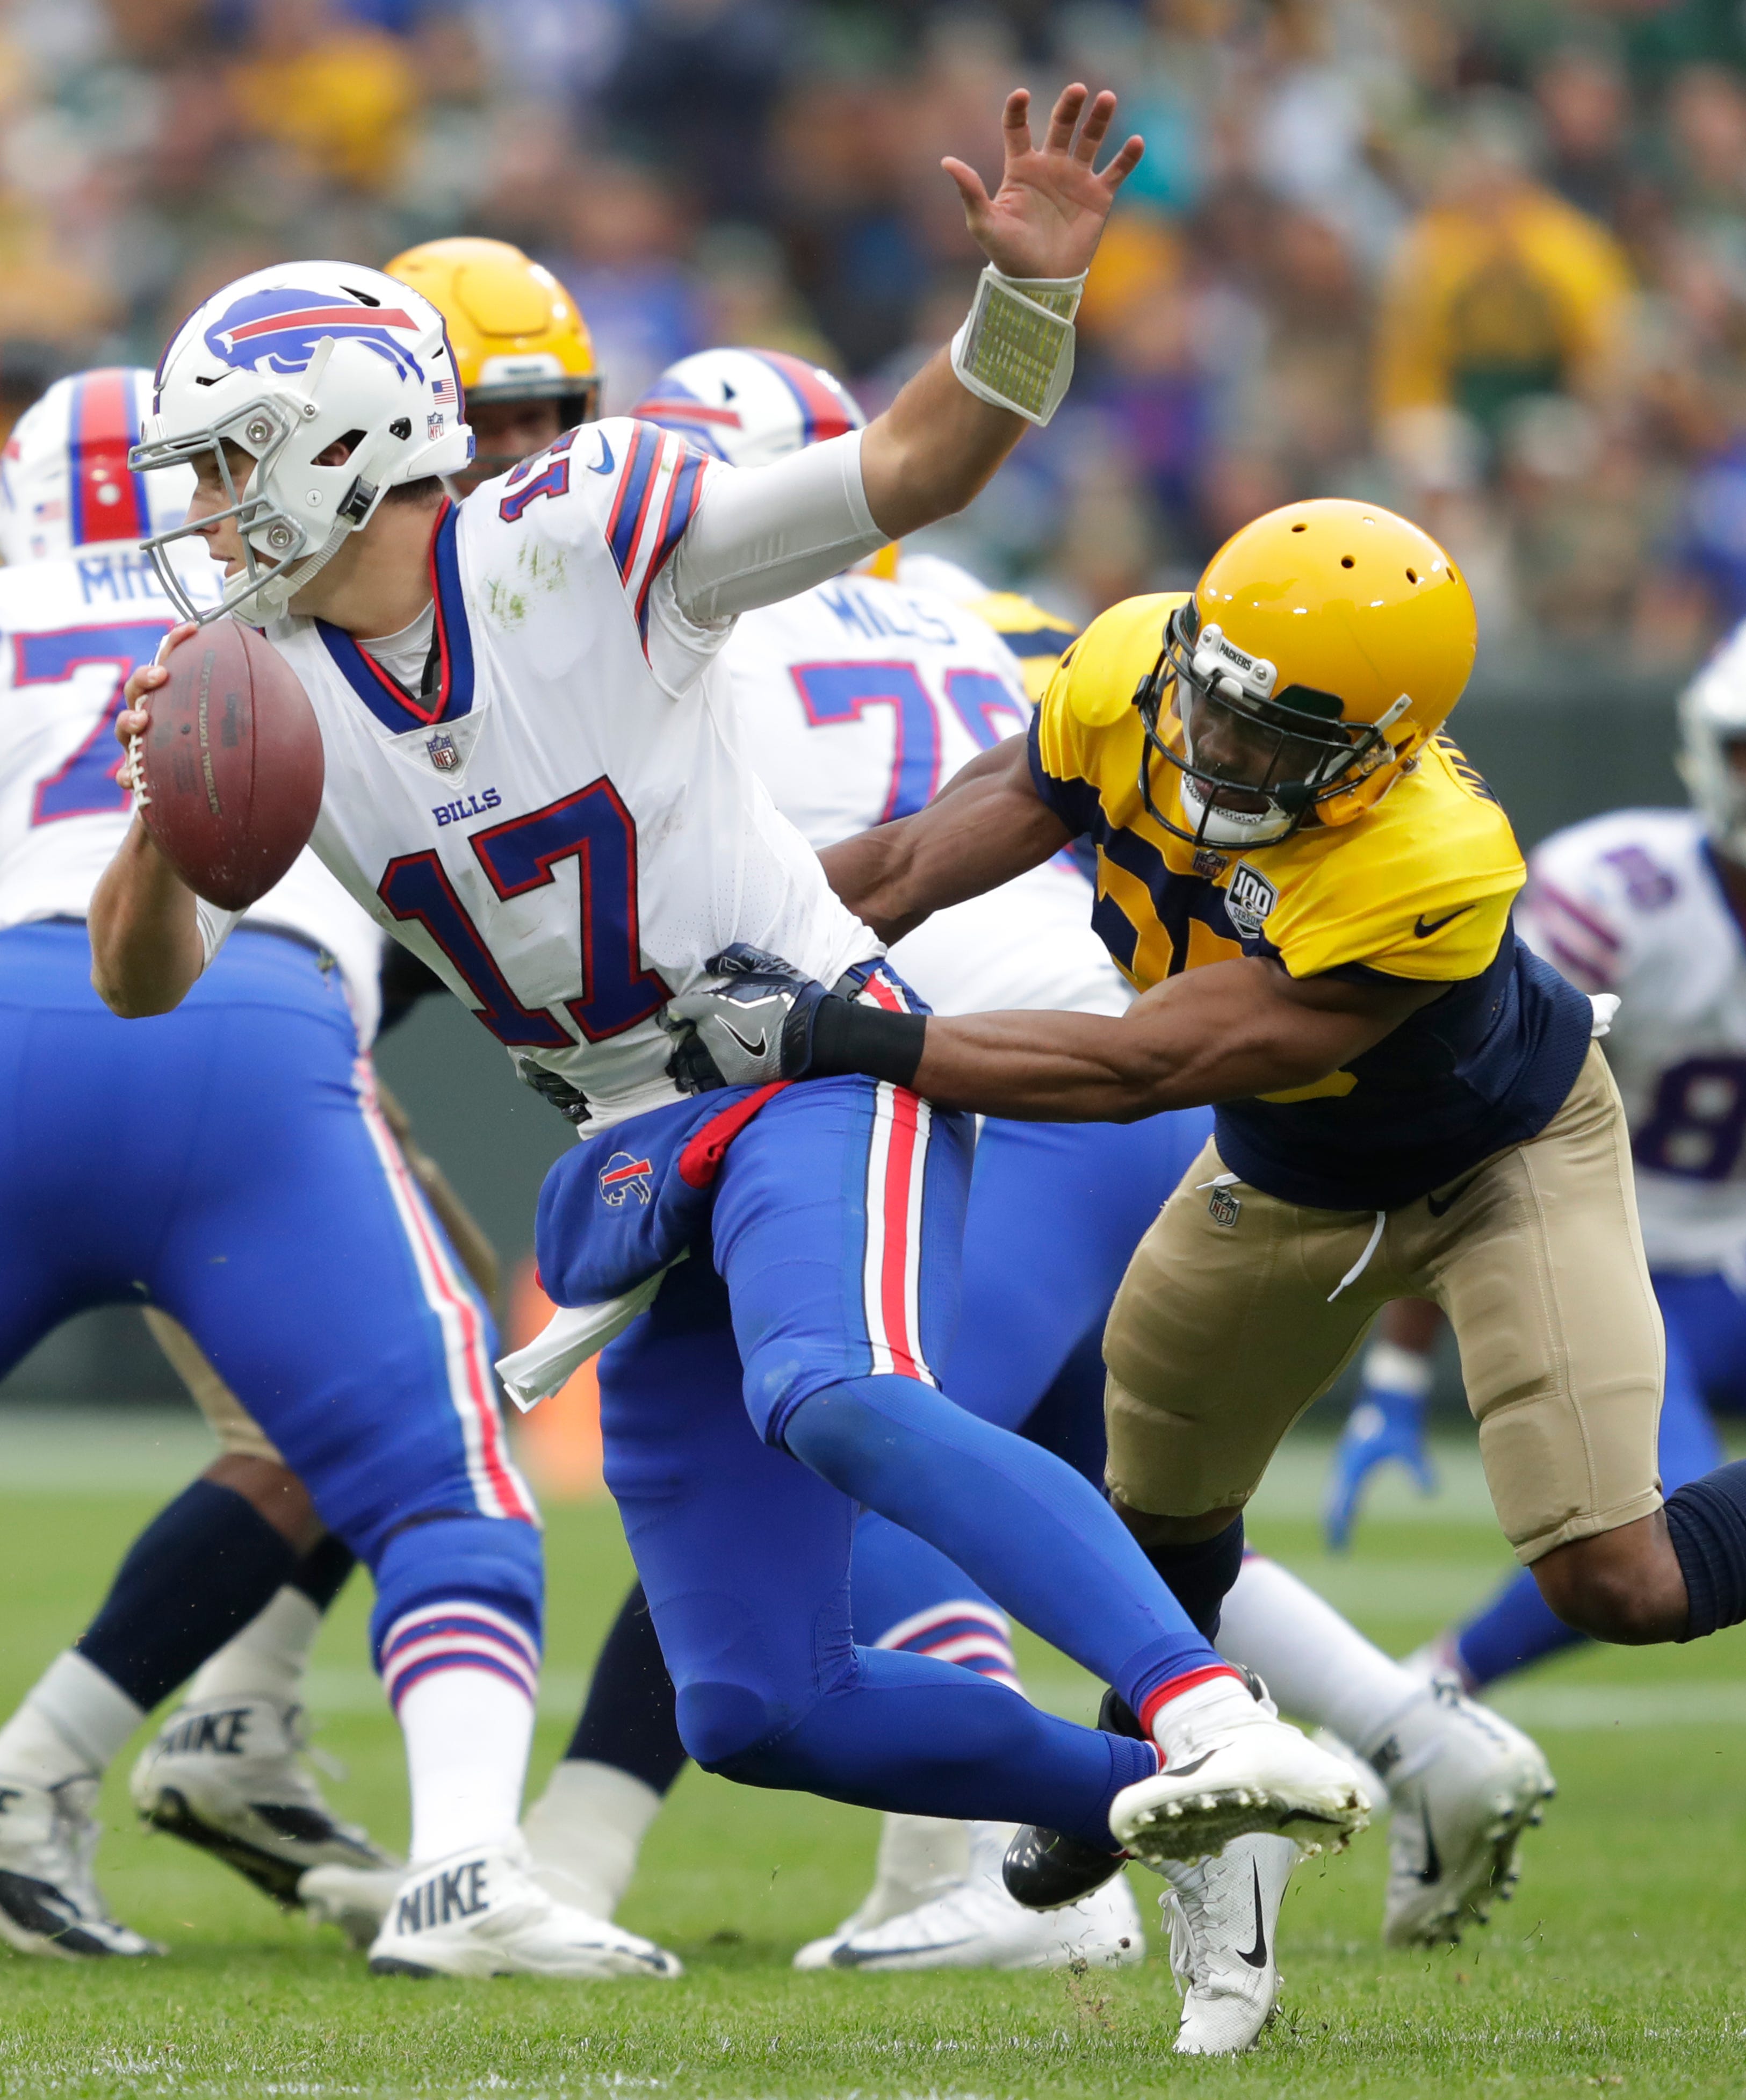 Green Bay Packers defensive back Jermaine Whitehead (35) sacks Buffalo Bills quarterback Josh Allen (17) in the third quarter during their football game Sunday, Sept. 30, 2018, at Lambeau Field in Green Bay, Wis. 
Dan Powers/USA TODAY NETWORK-Wisconsin